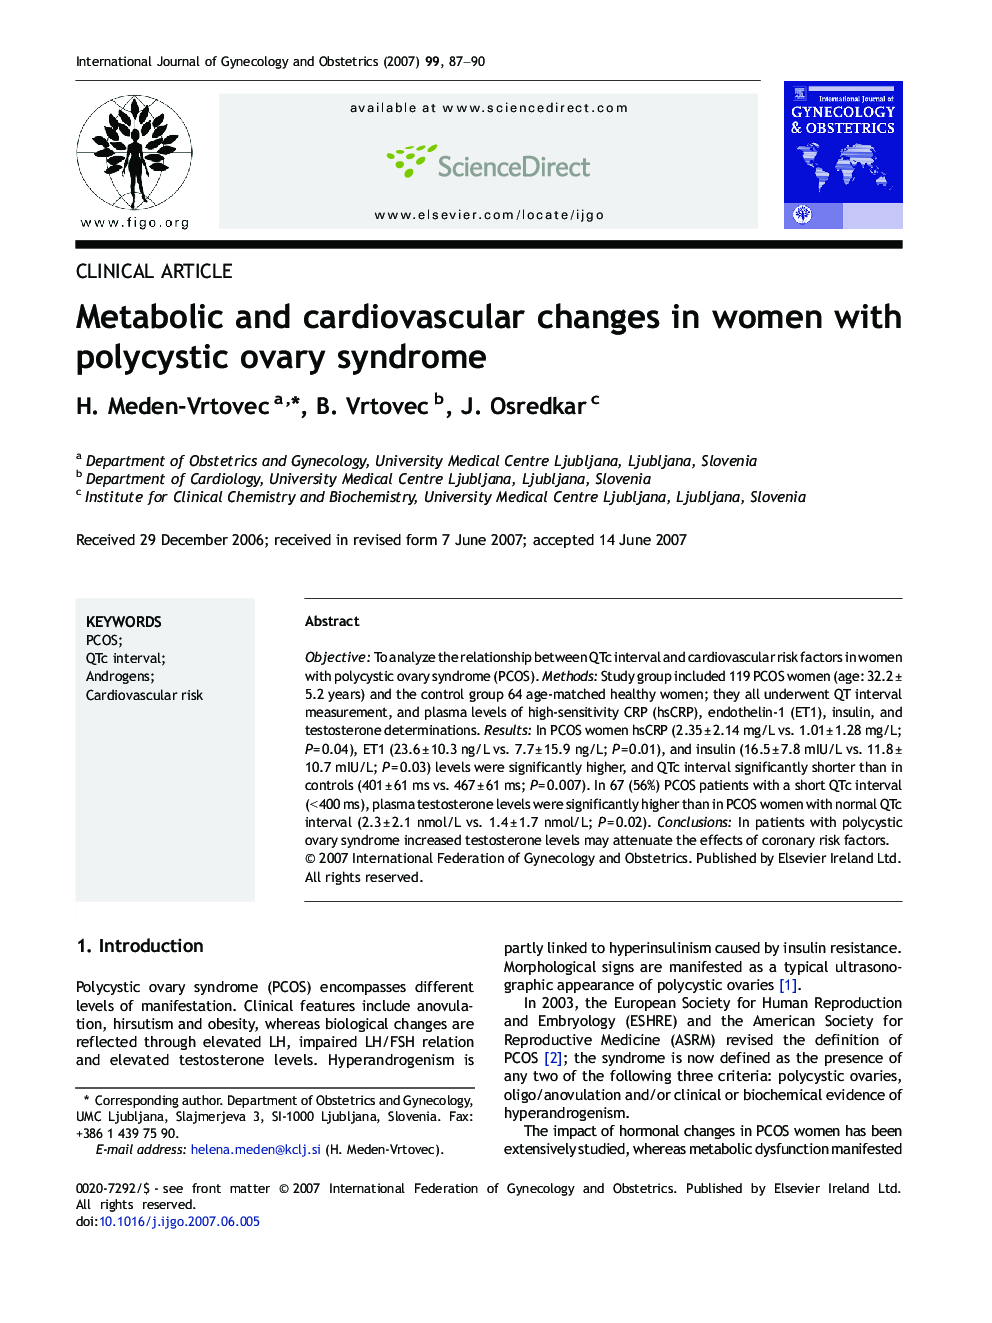 Metabolic and cardiovascular changes in women with polycystic ovary syndrome